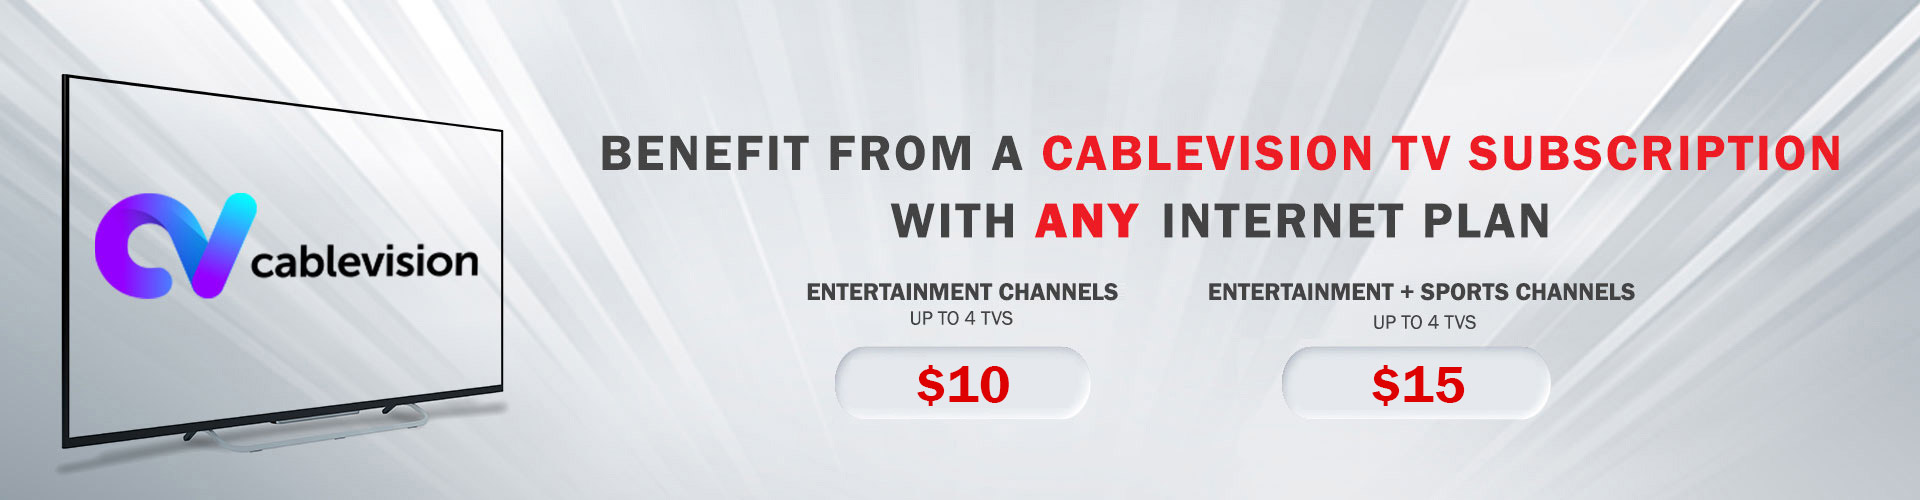 Benefit from a Cablevision TV subscription